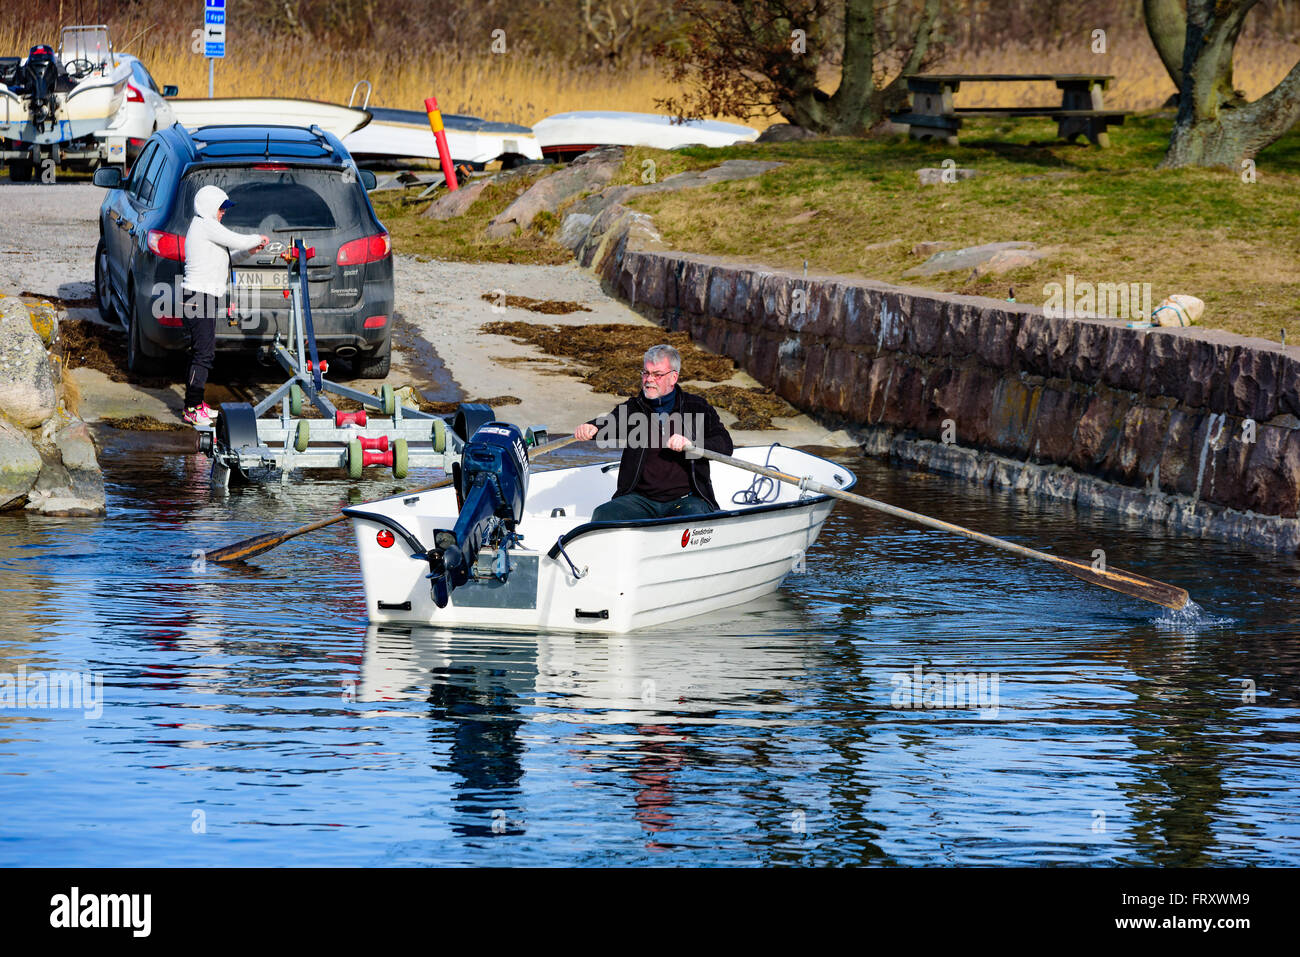 Torhamn, Sweden - March 18, 2016: The launching of a small plastic motor boat at a ramp in the marina. Boat is rowed by man afte Stock Photo